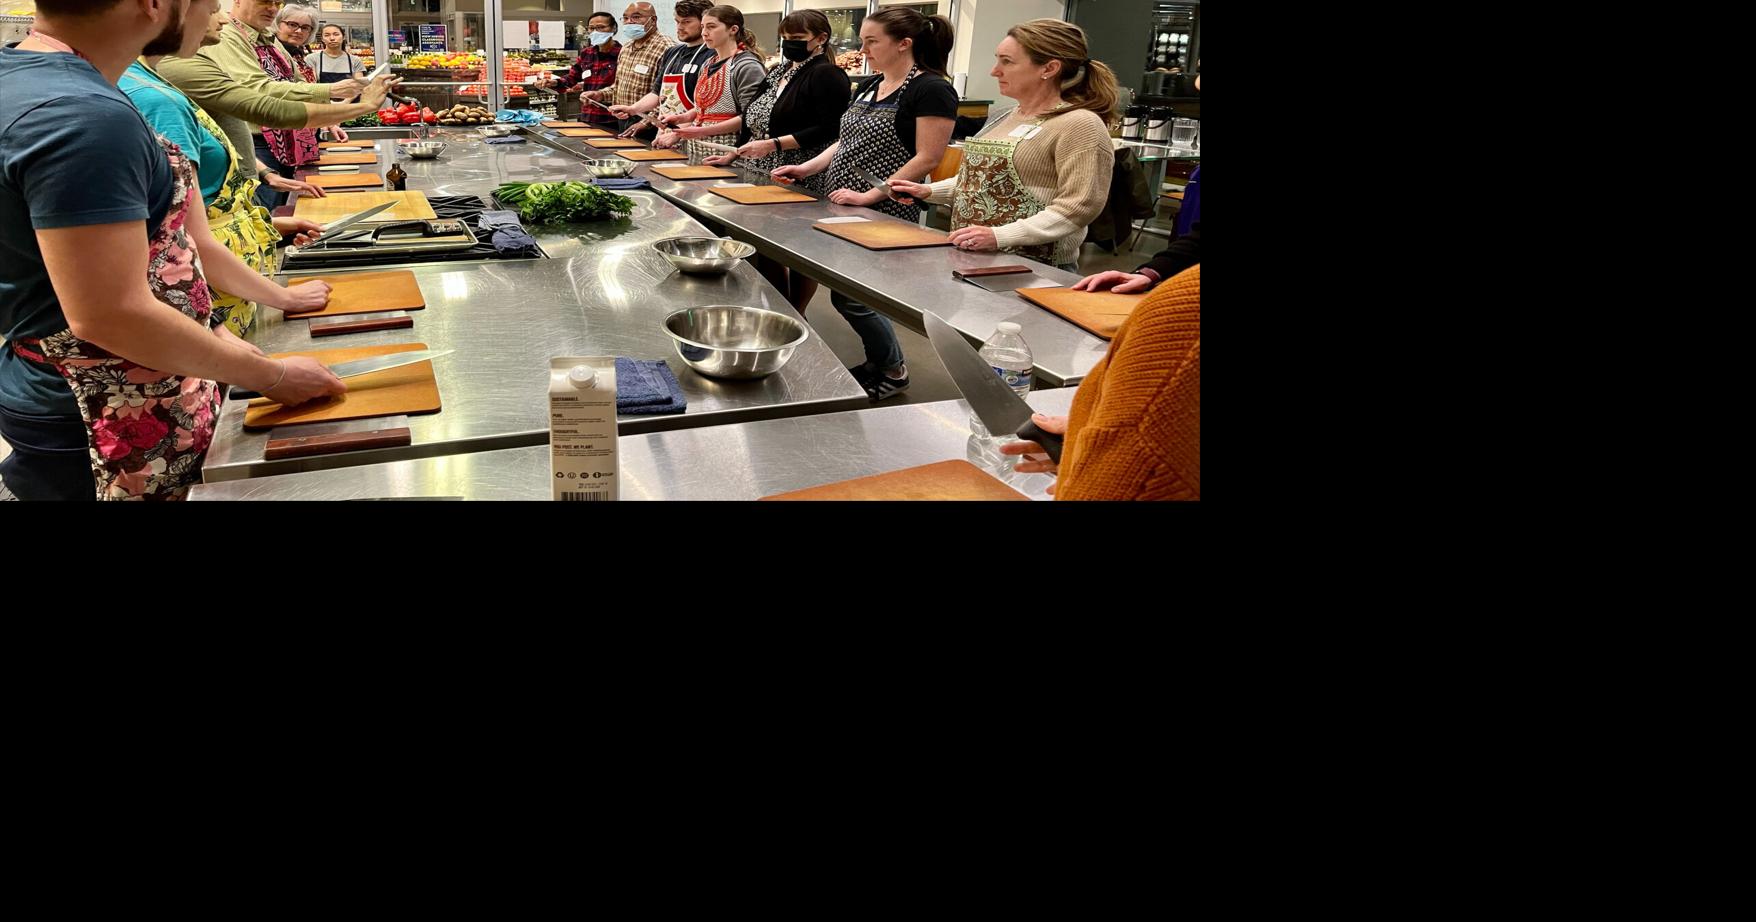 Spring Cooking Classes in Bloom at PCC Eat + Drink